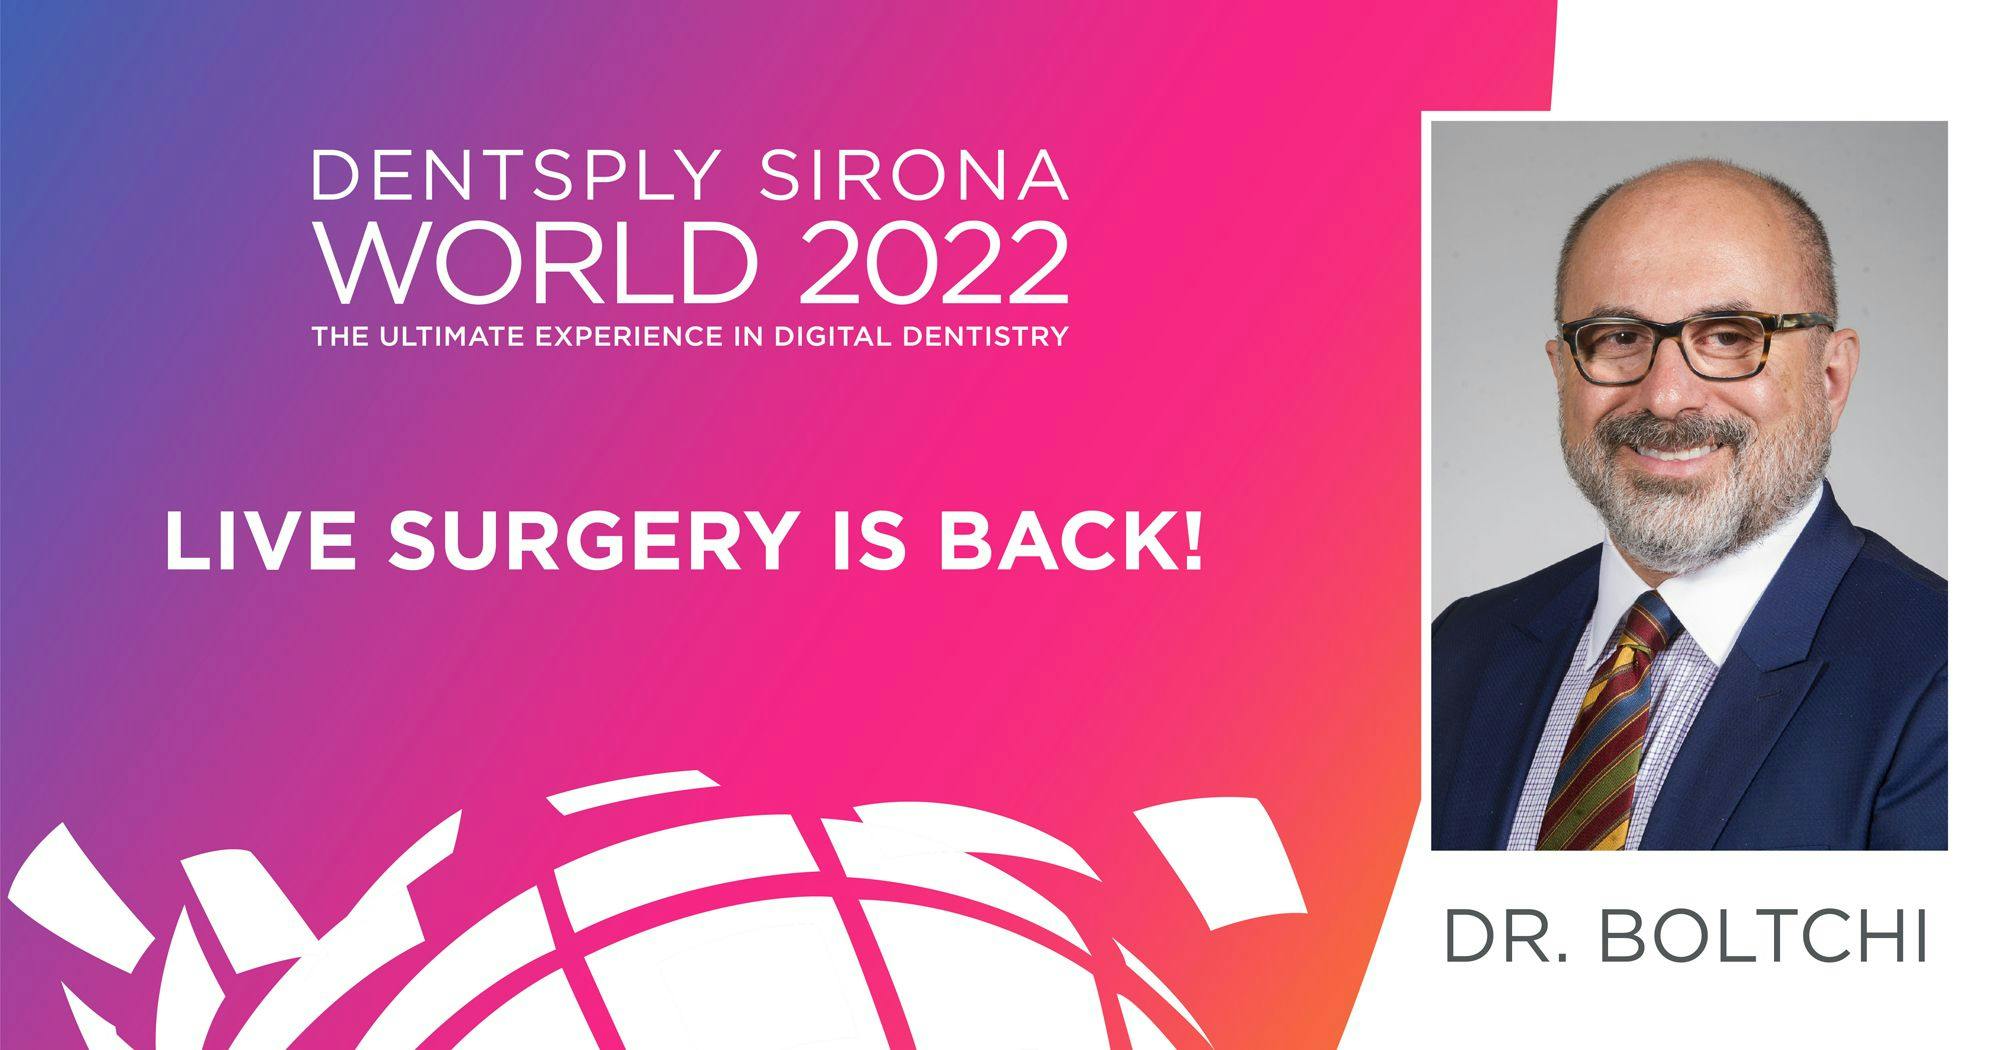 Dentsply Sirona World 2022 Will Bring Live Surgery, David Spade, and Other Offerings